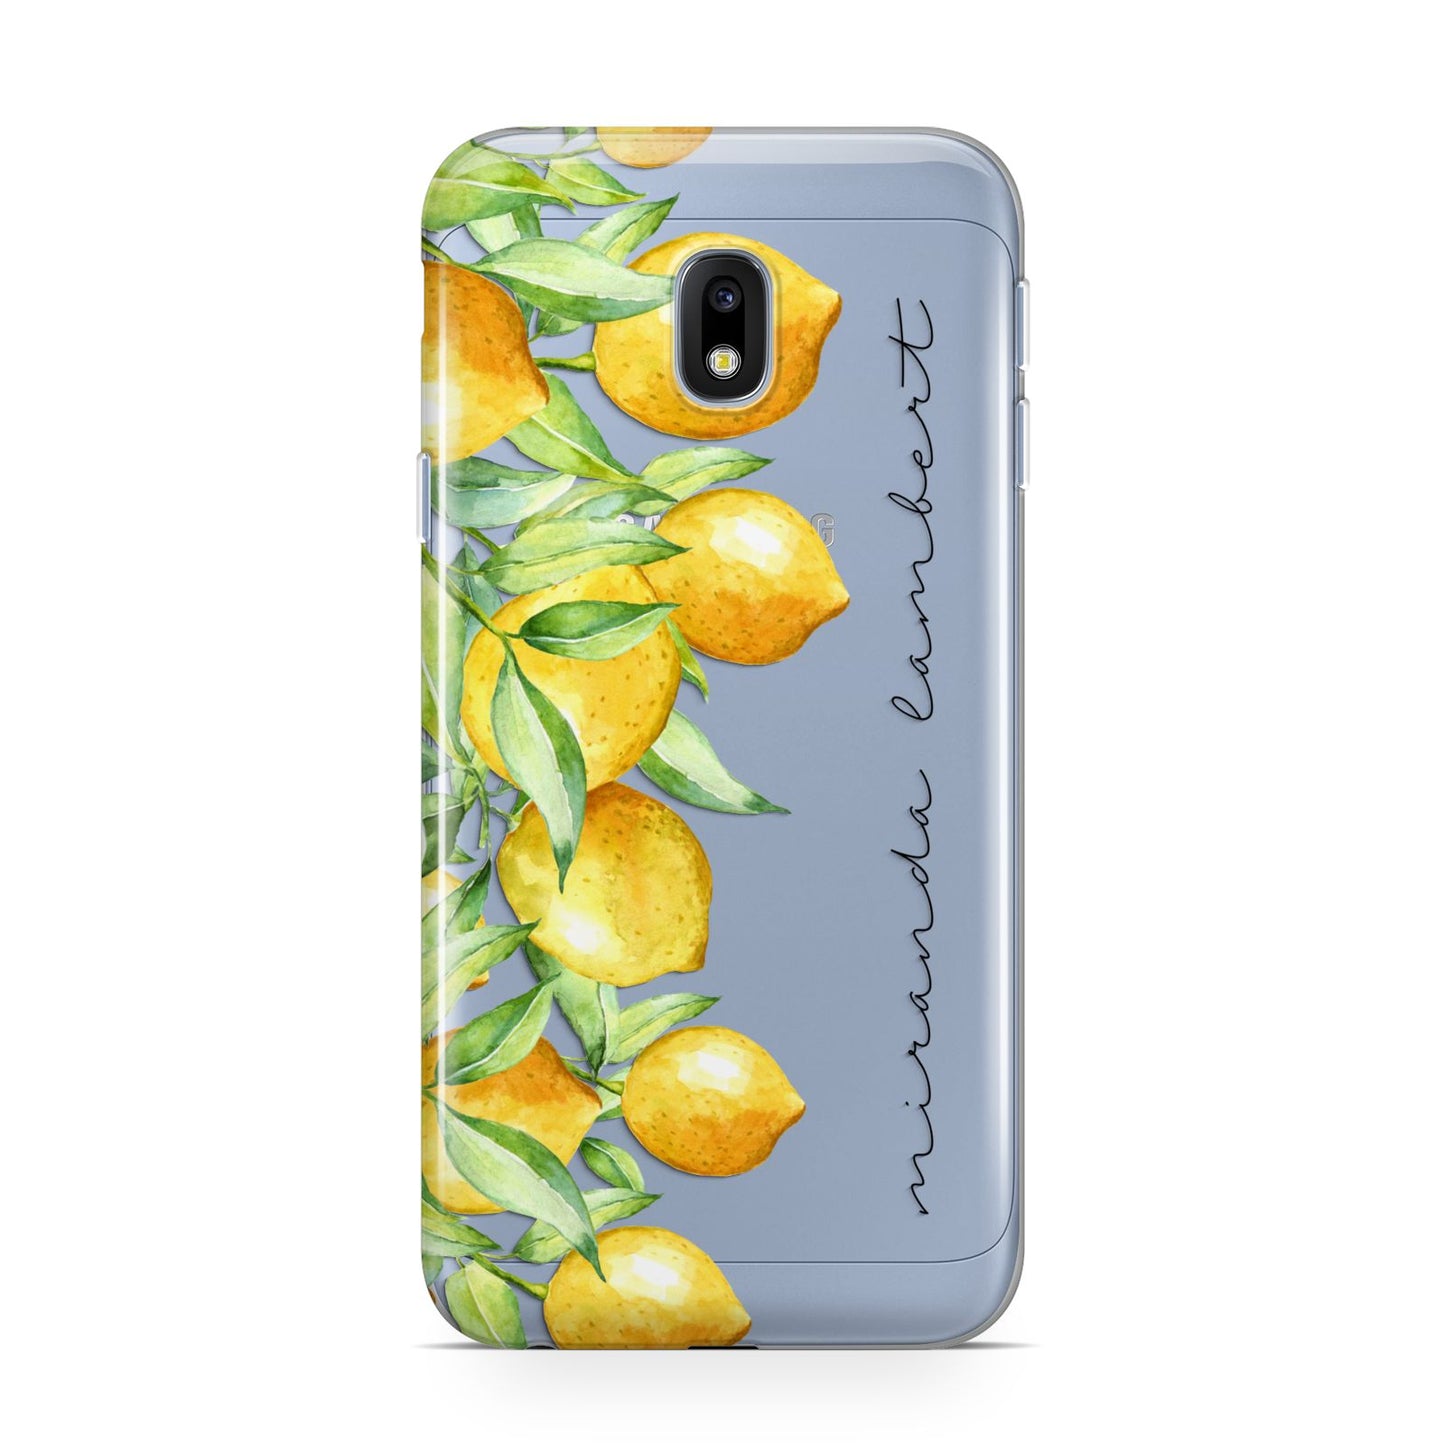 Personalised Lemon Bunches Samsung Galaxy J3 2017 Case